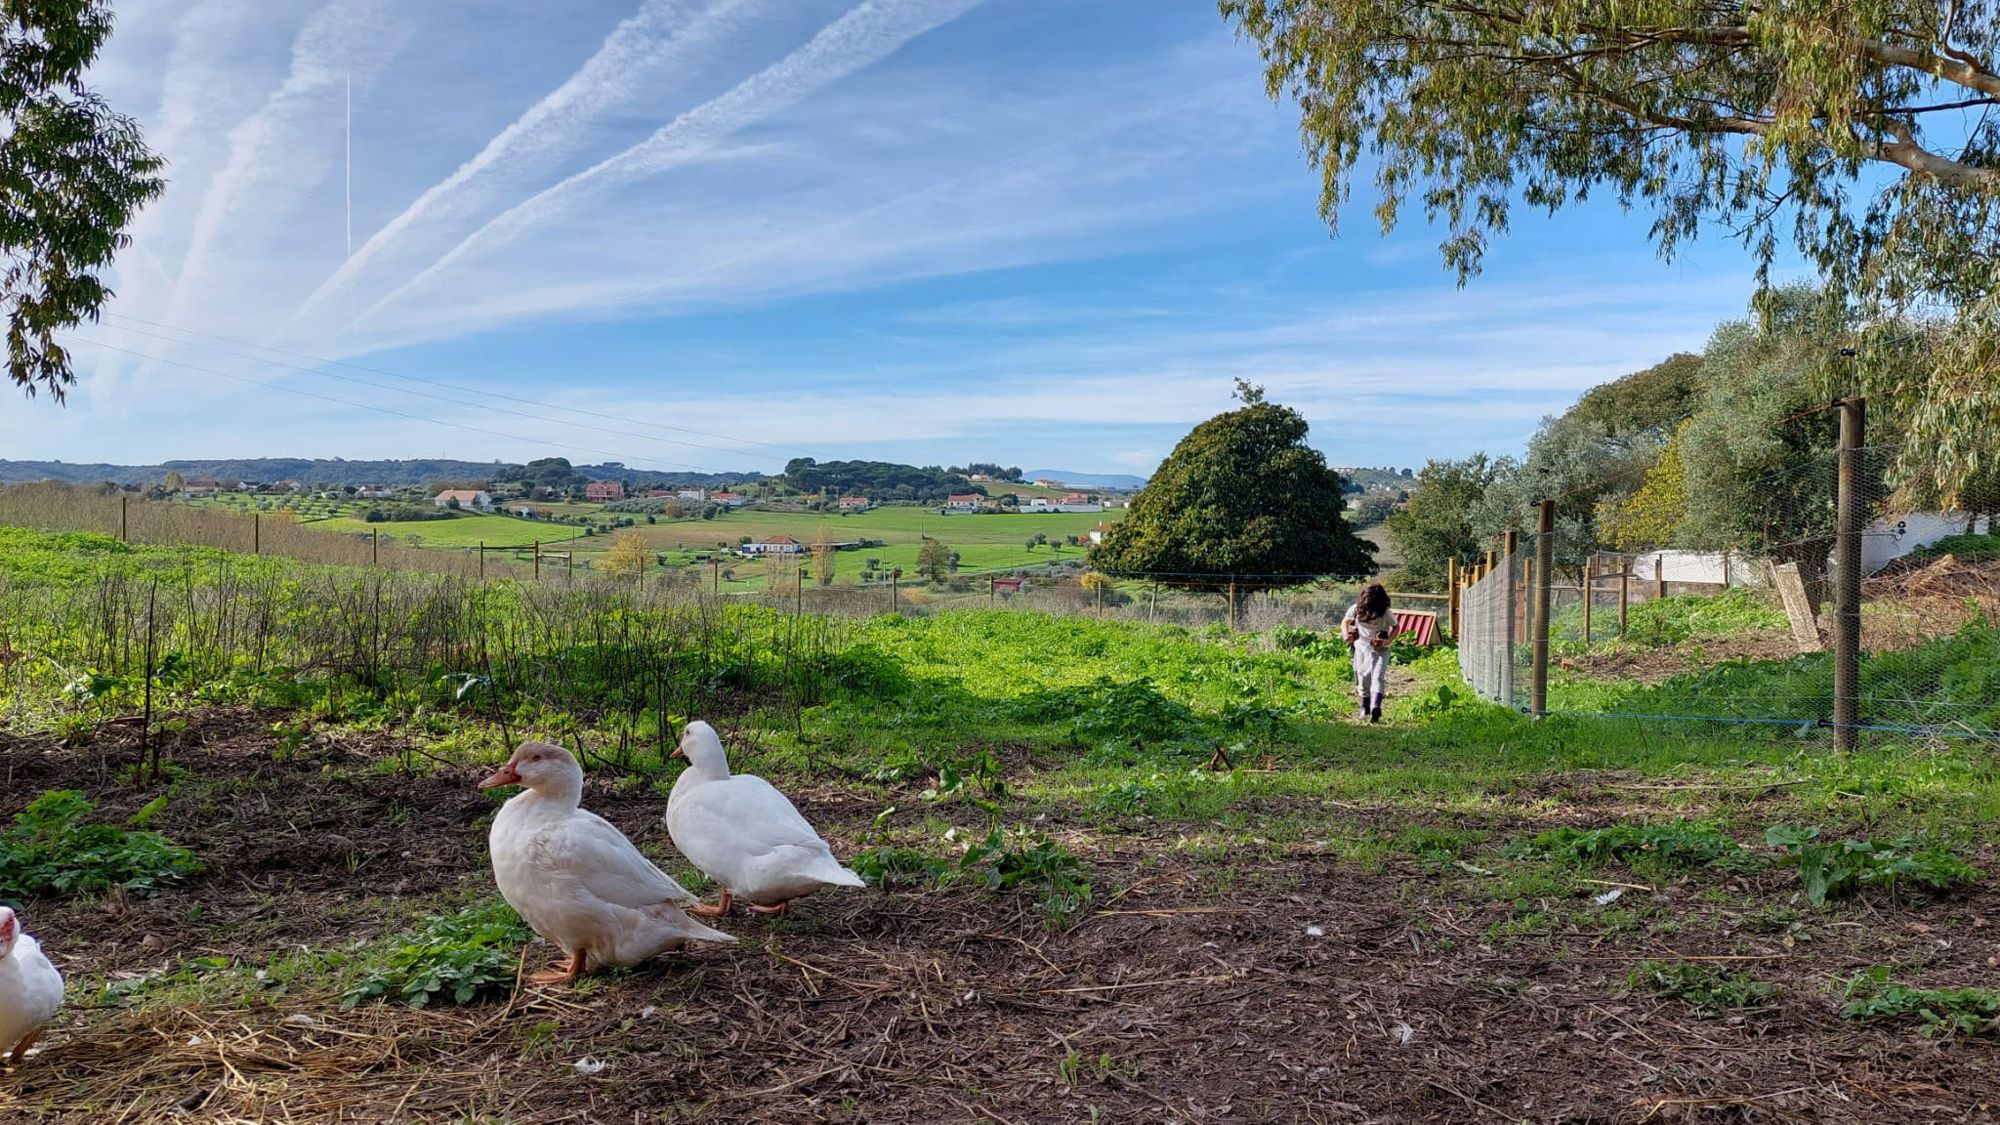 White ducks running free on the railings of the animal welfare sanctuary in Portugal